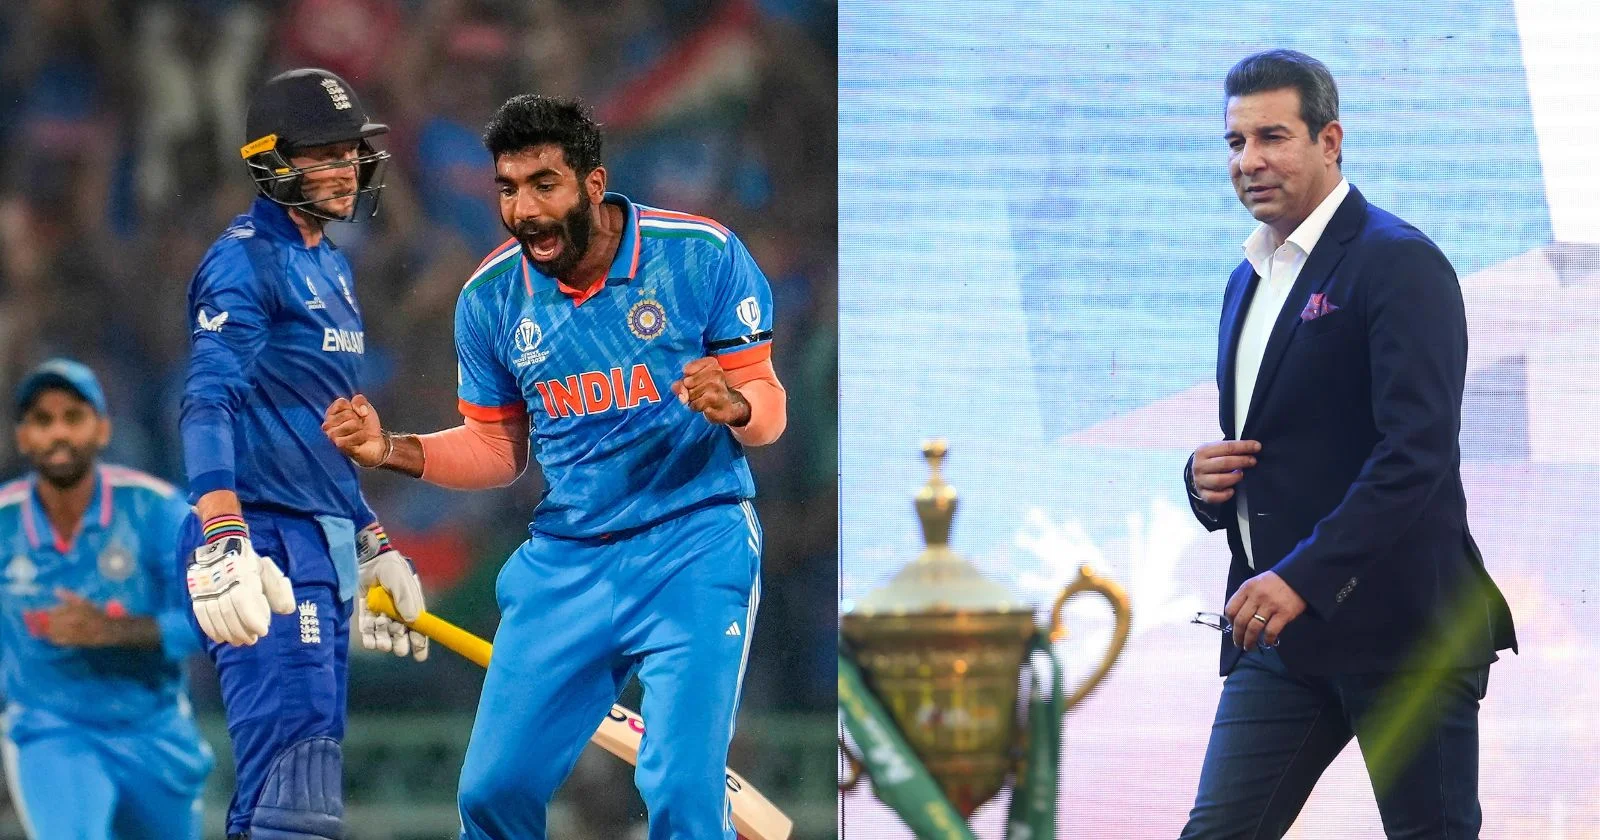 Wasim Akram Tells The Most Funny Way To Literally Stop Jasprit Bumrah From Bowling